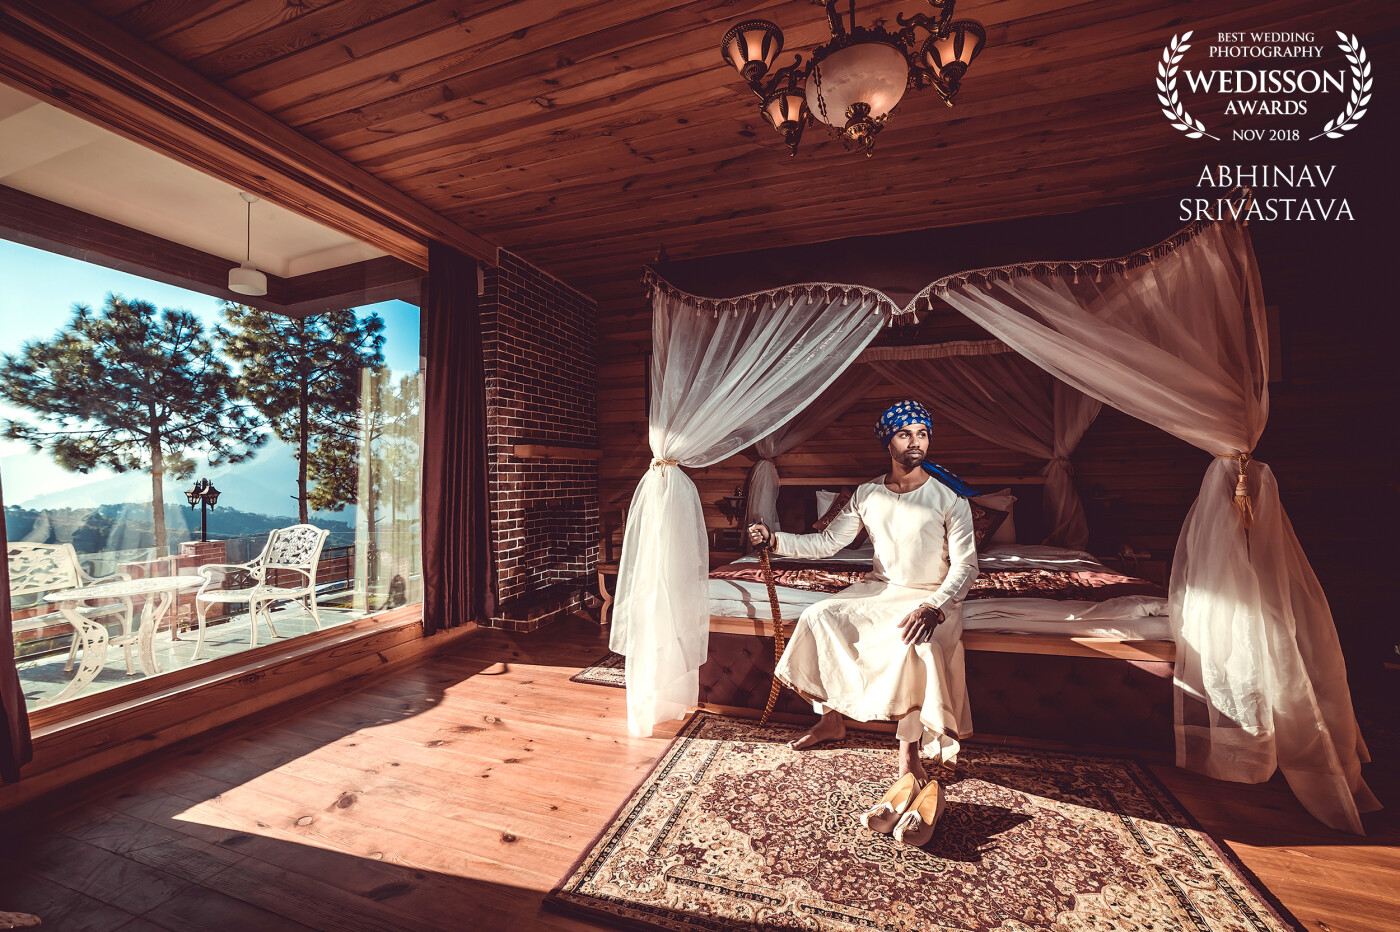 Kunal the Groom being a Non- Resident Indian from America, got married on 21st November 2018. <br />
The wedding was celebrated on the beautiful destination of Shimla. <br />
